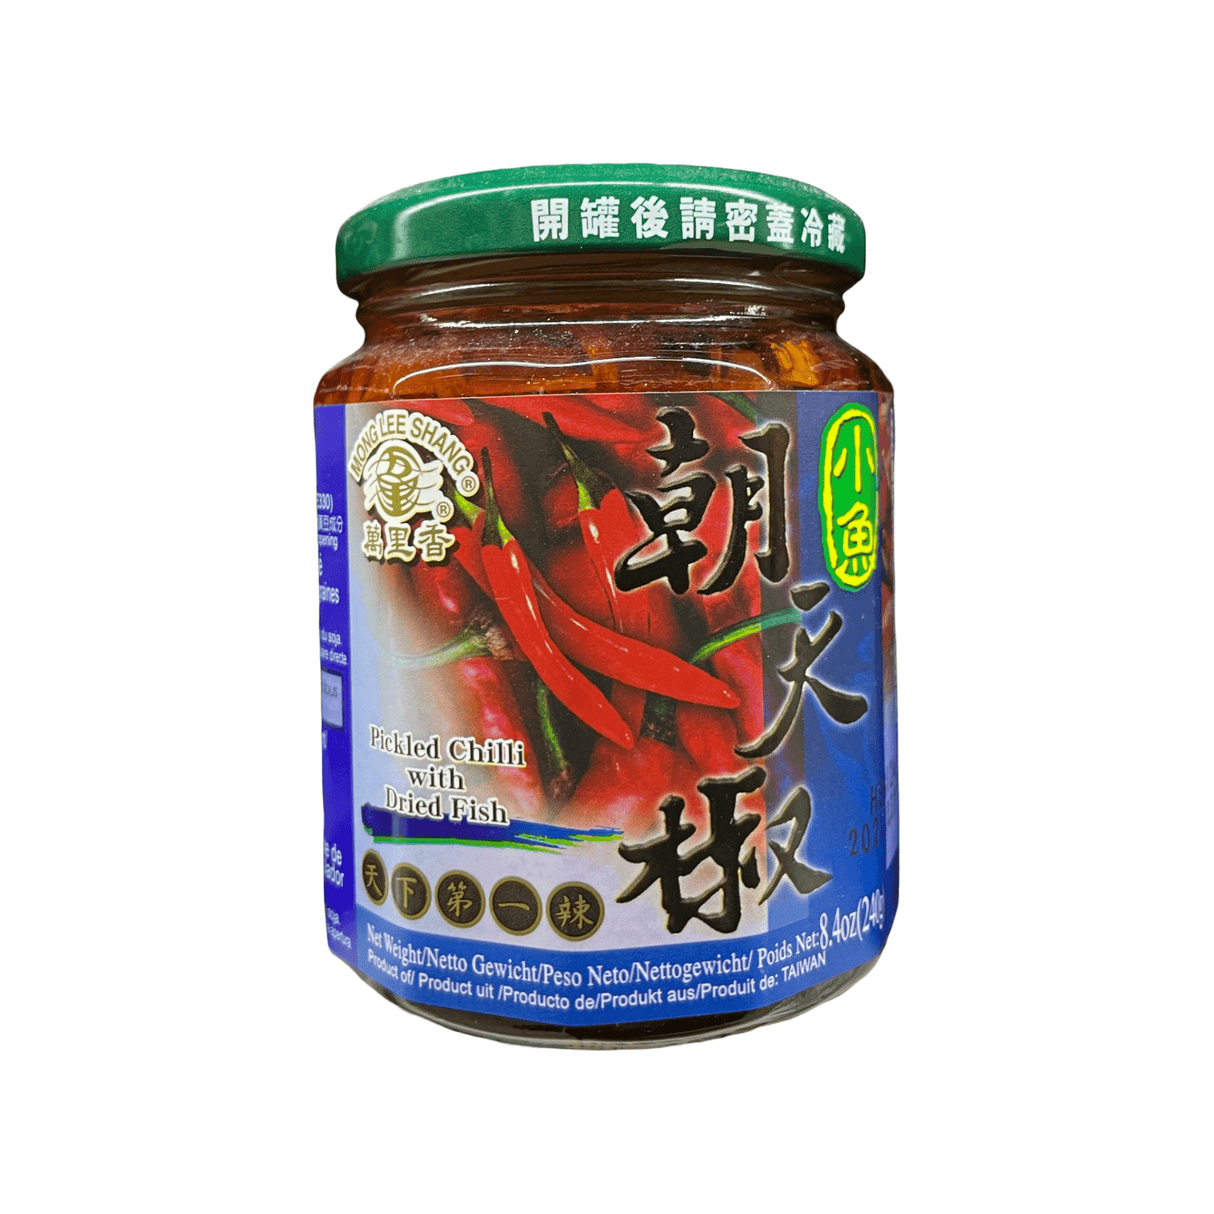 Mong Lee Shang Pickled Chilli with Dried Fish 8.4 oz